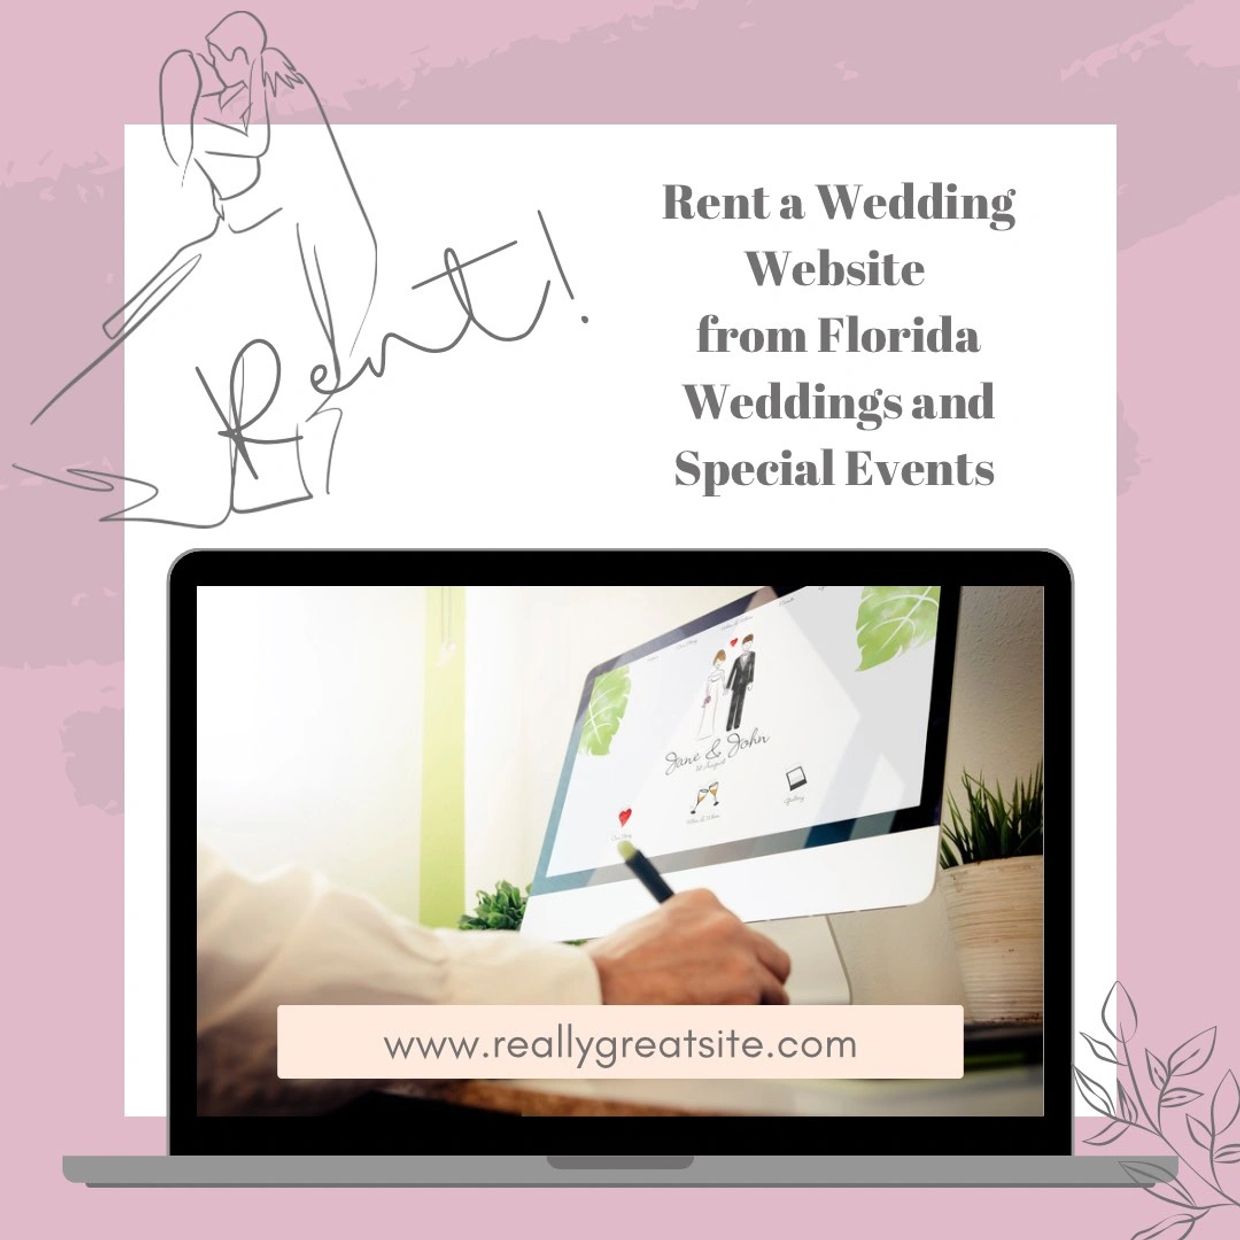 Florida Weddings and Special Events offers business wedding website rentals